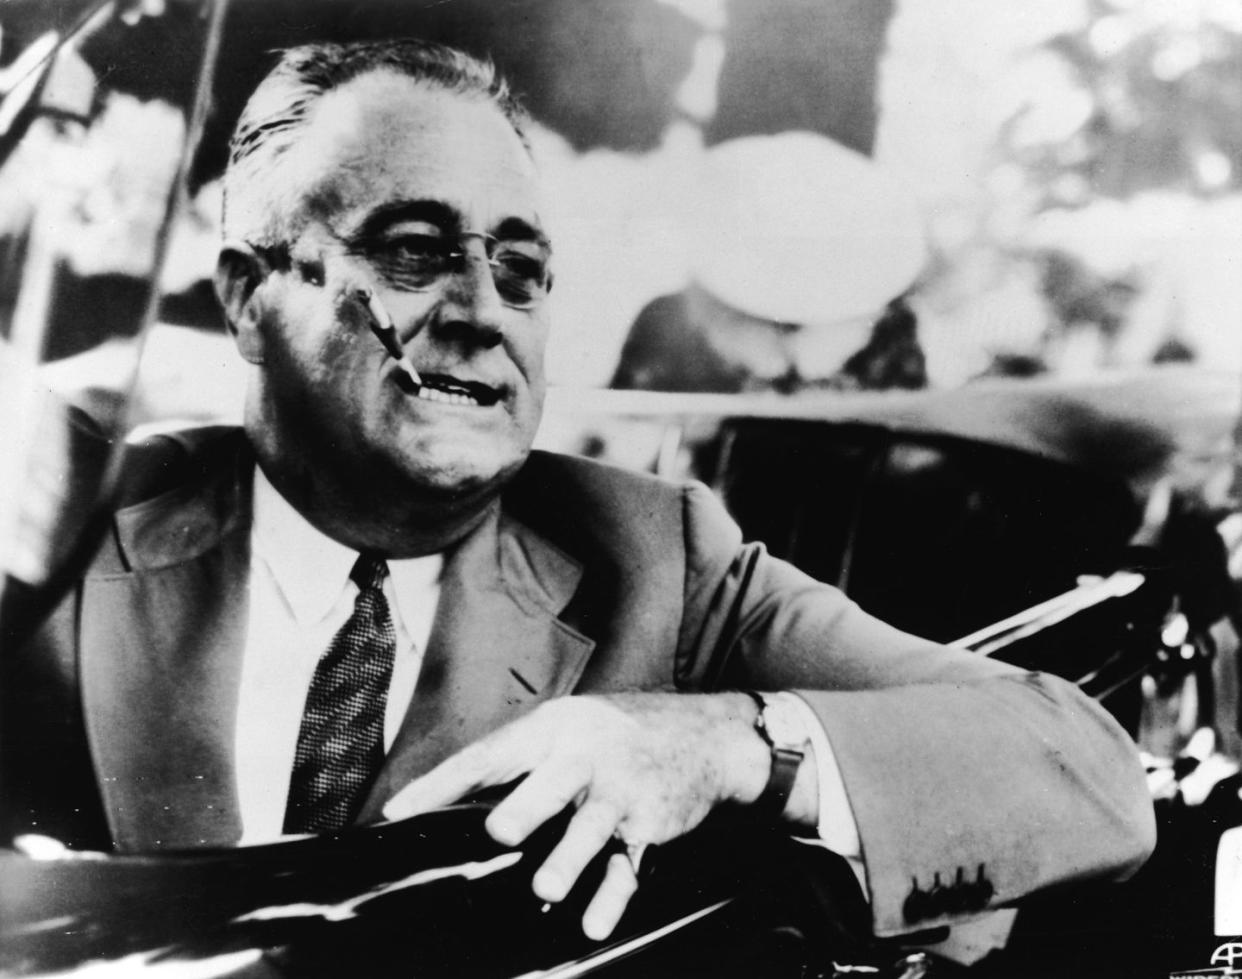 roosevelt at the wheel